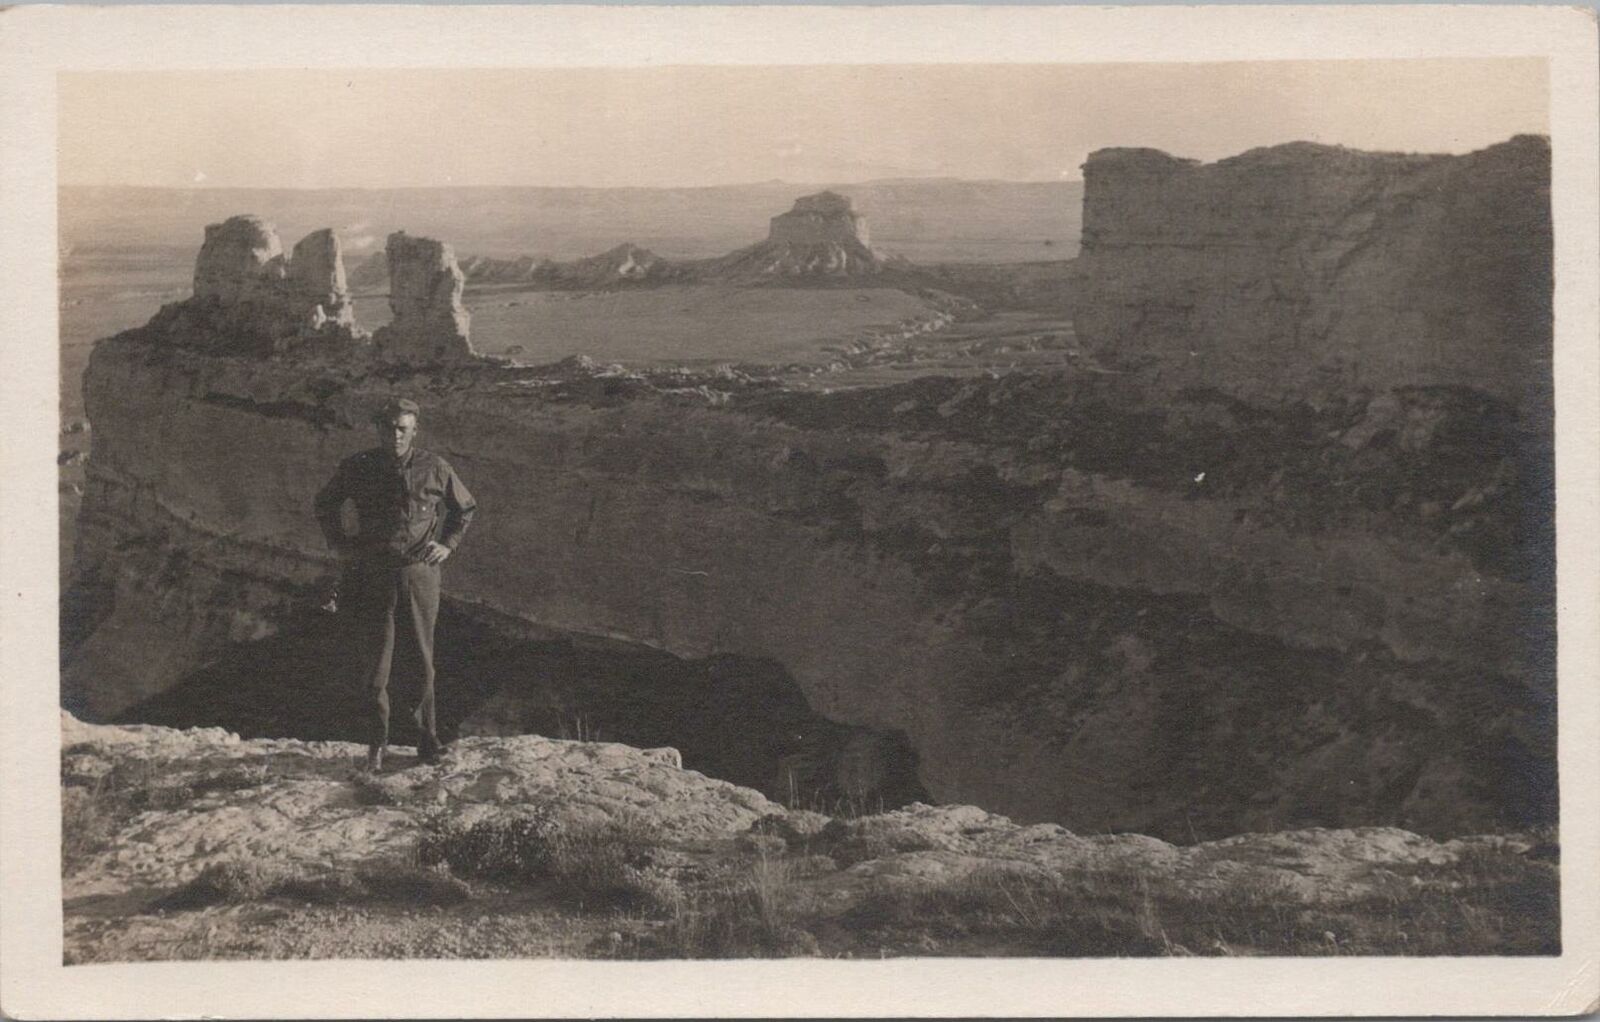 RPPC Postcard Man Posing in front of Canyons Southwest c. 1940s